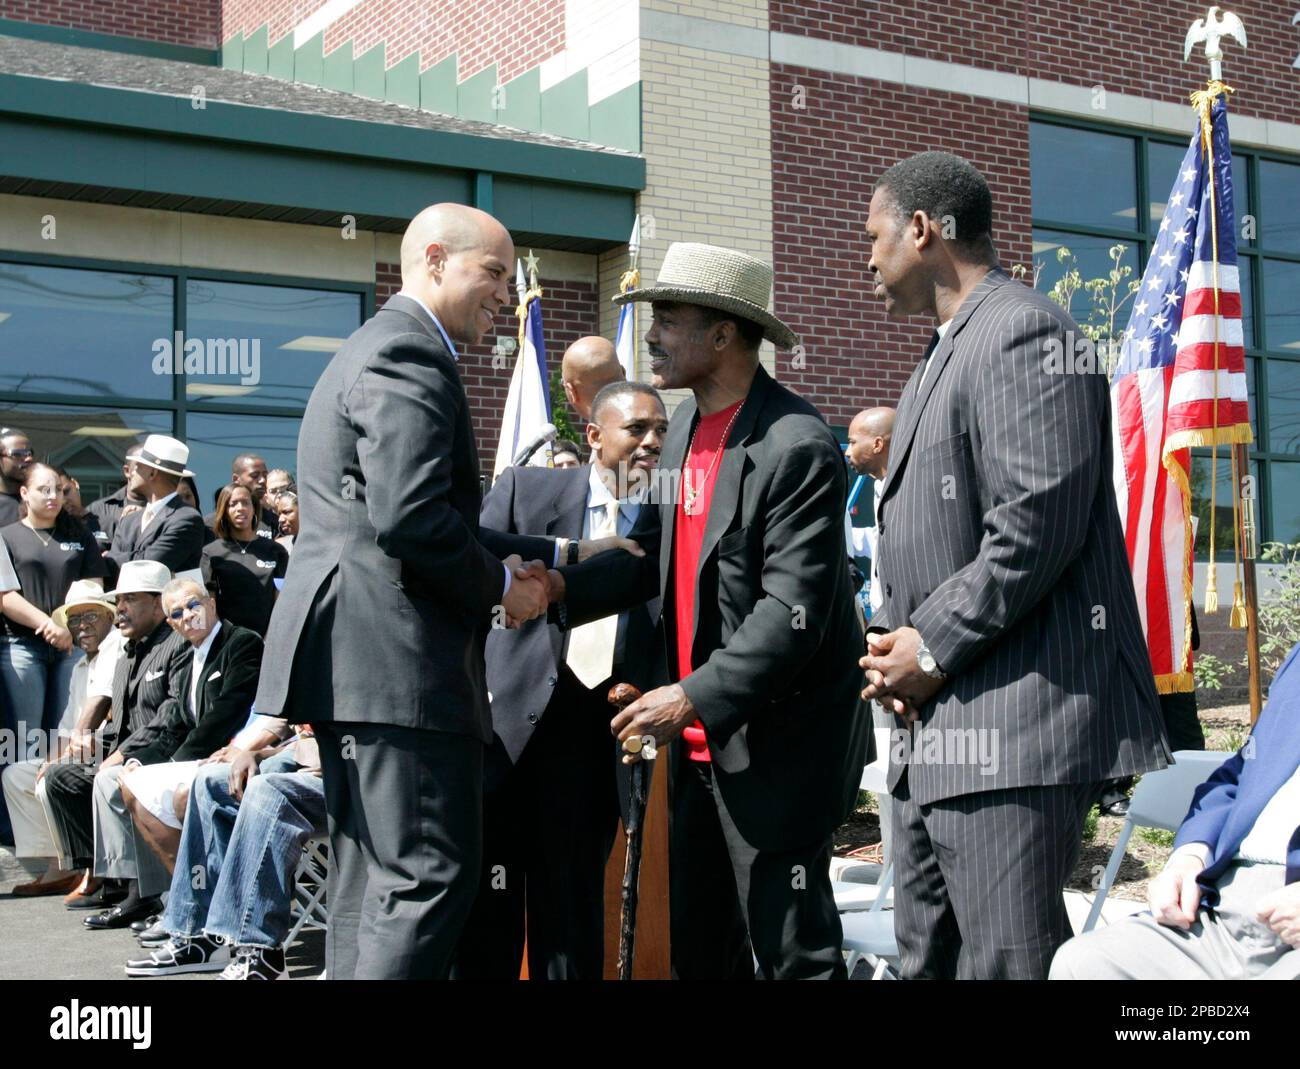 Newark Mayor Cory Booker, left standing, greets former heavyweight champion Joe Frazier, center, and his son, former boxer Marvis Frazier, during the opening of a new recreation center in Newark, N.J., Thursday, June 21, 2007. The new facility, dubbed the "Club House," will offer a recording studio, computer lab with graphic design instruction, a fitness gym with boxing, karate and dance. (AP Photo/Mike Derer) Stock Photo